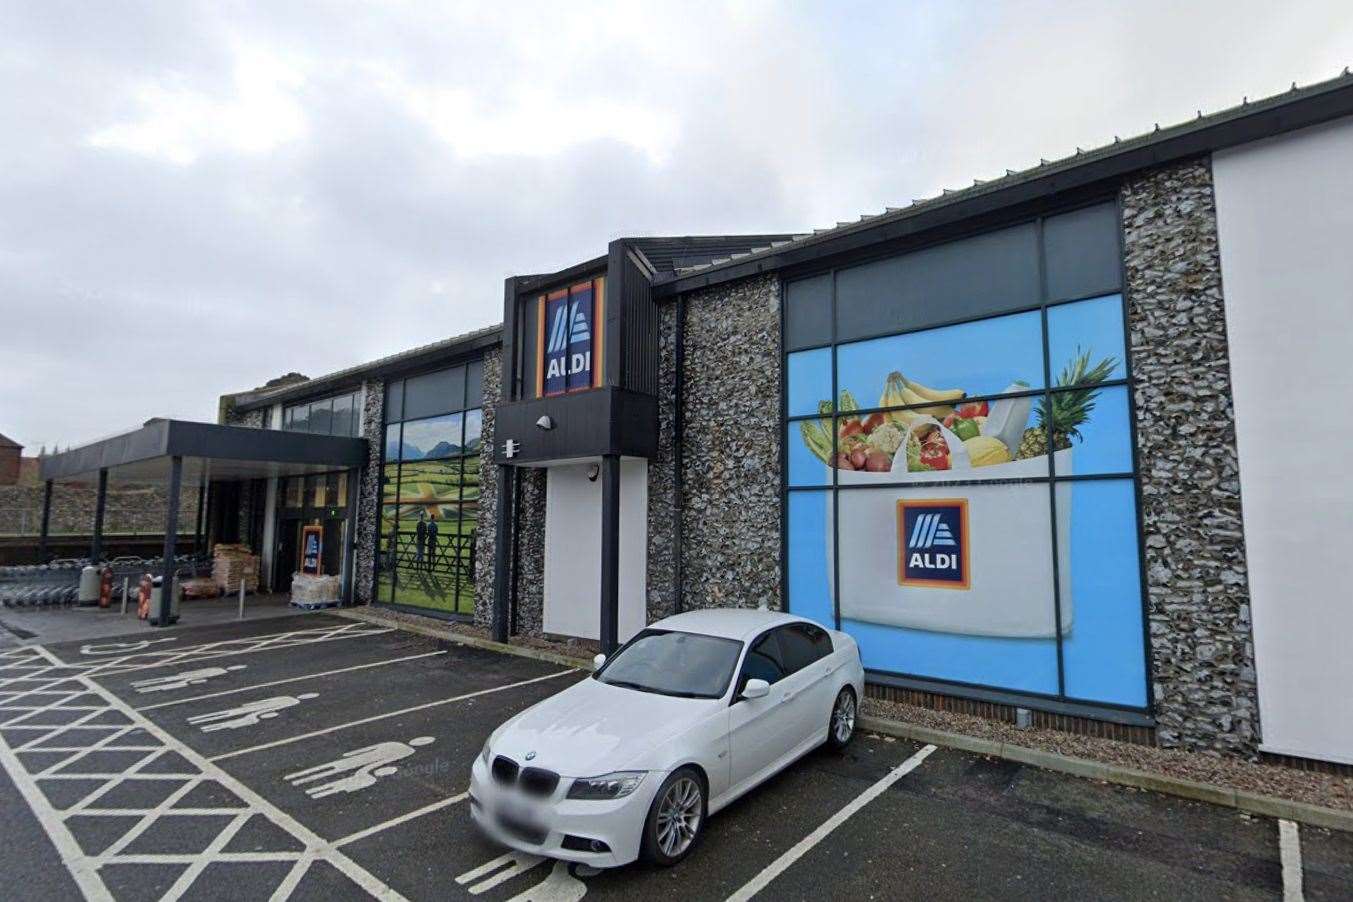 Developers have described the nearby Aldi as "monolithic". Picture: Google